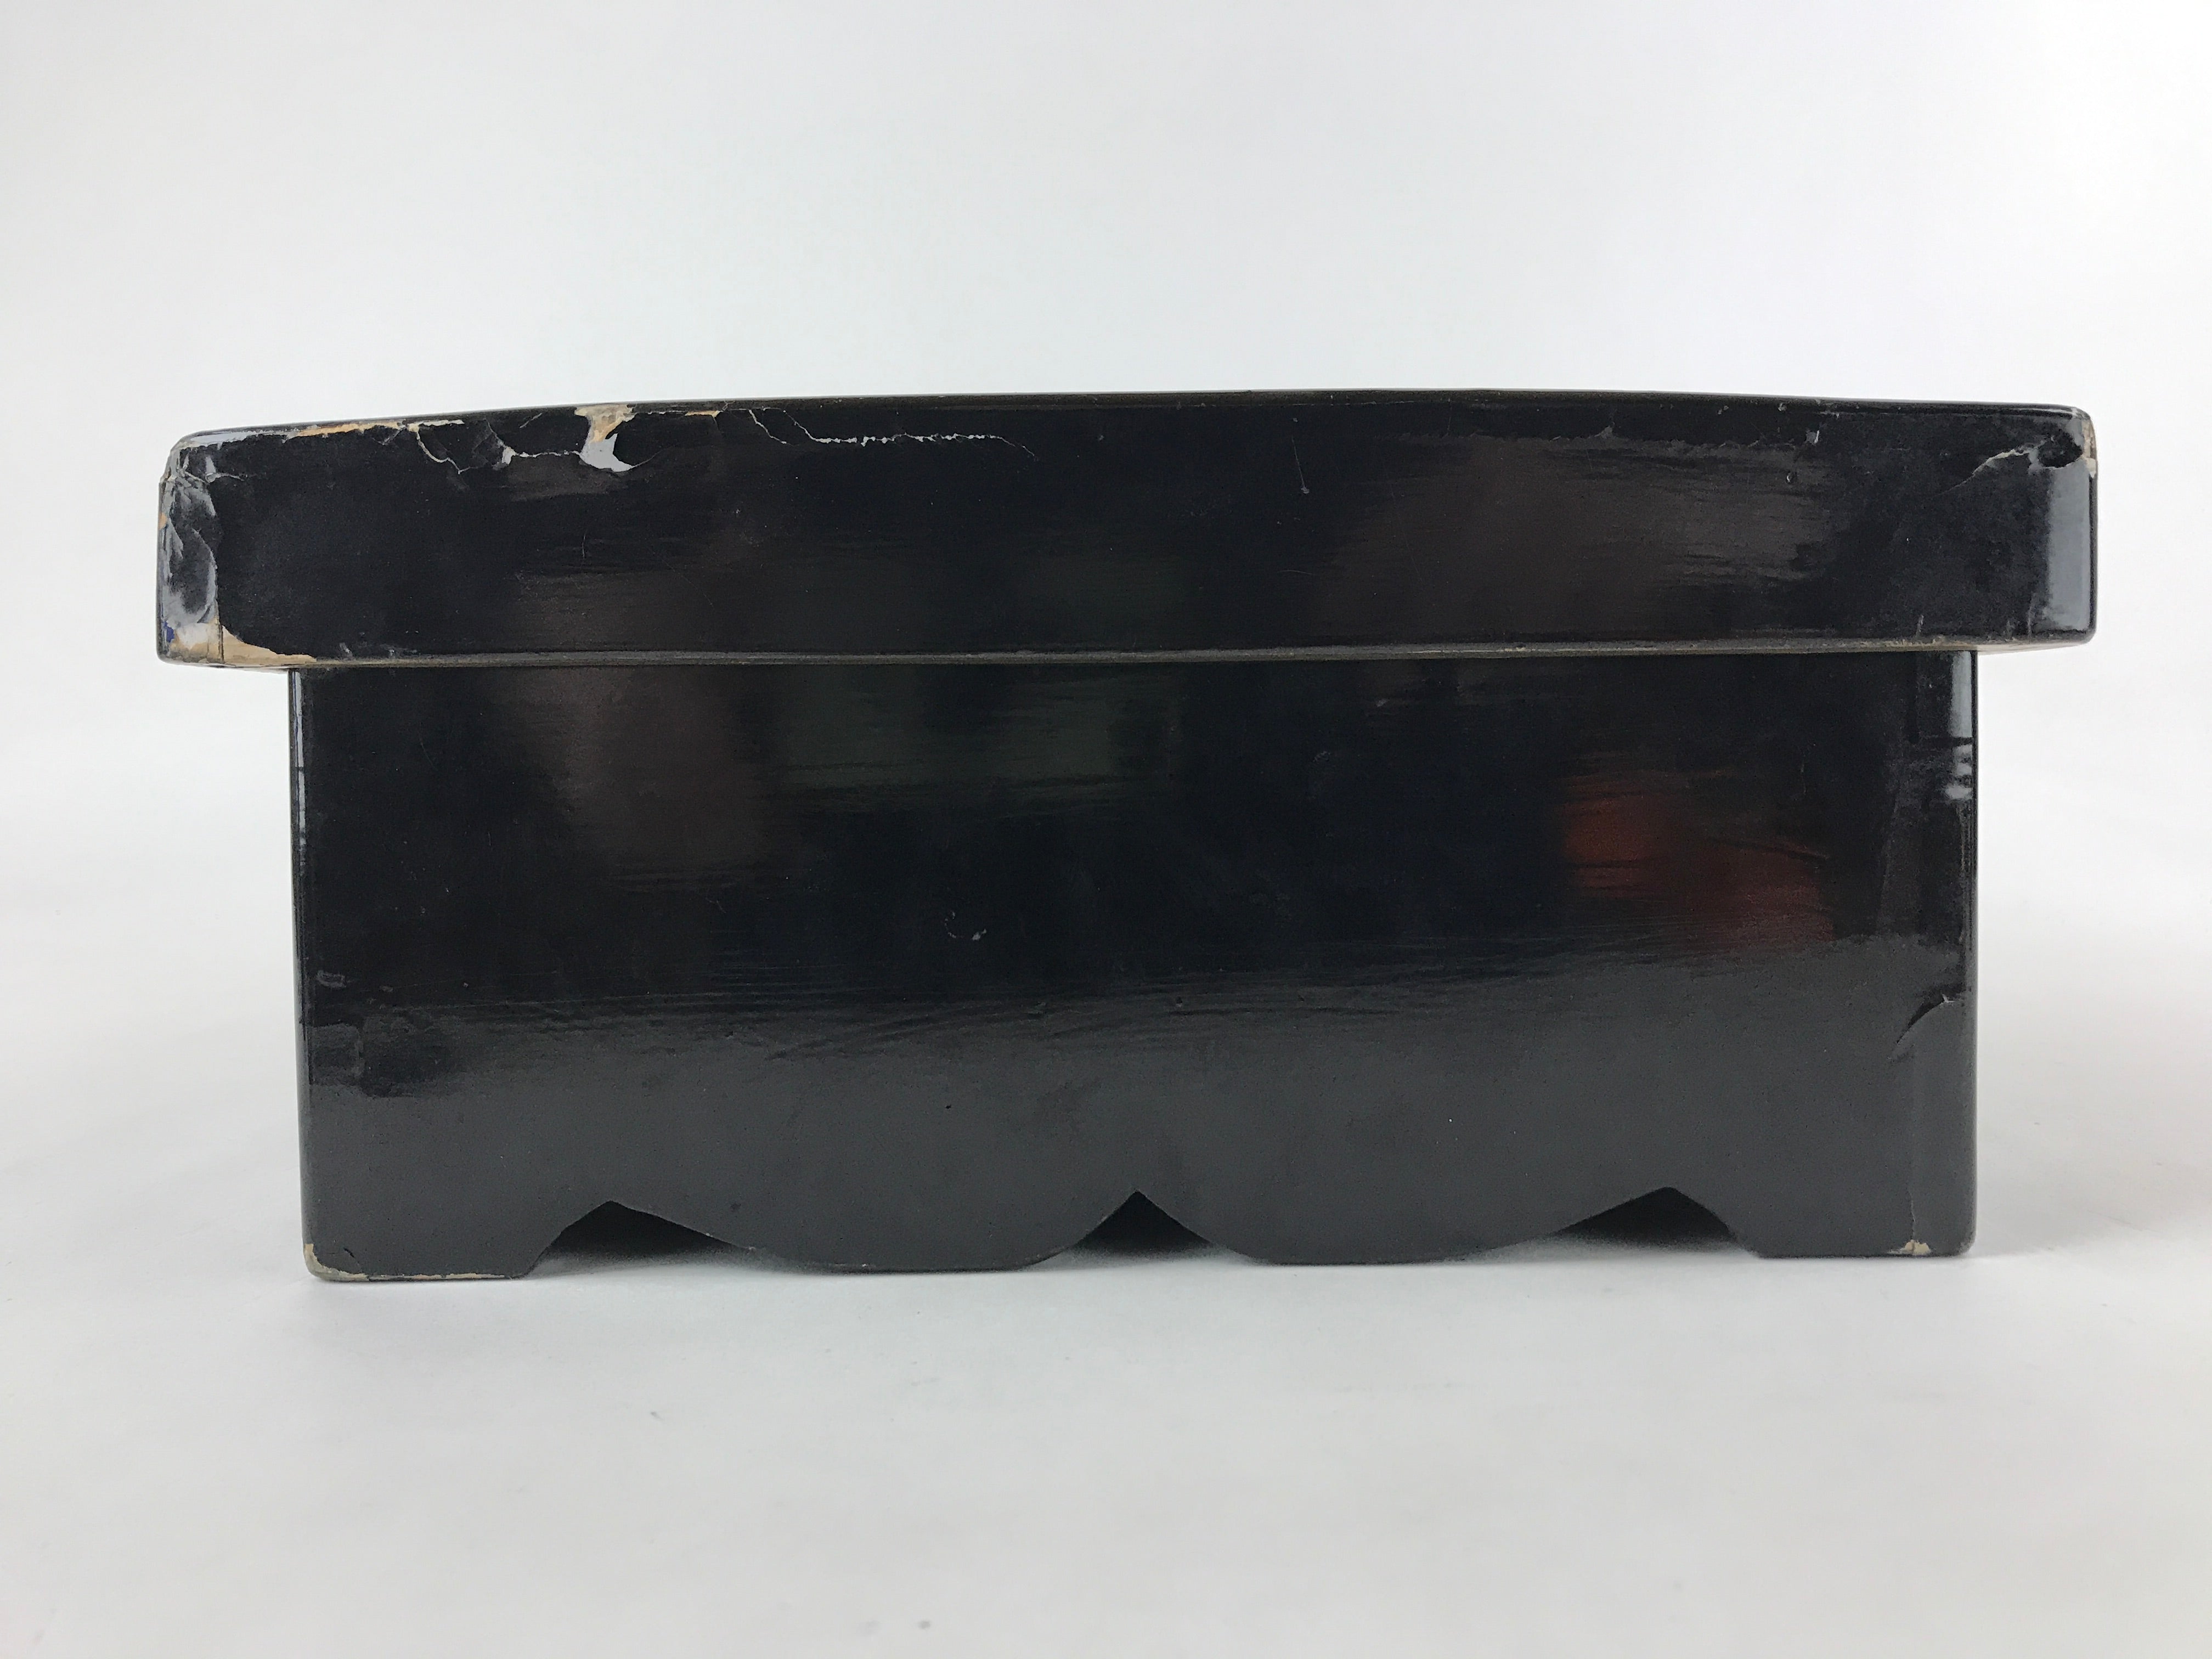 Antique Japanese Lacquered Wooden Big Storage Box With Lid Black Red L69